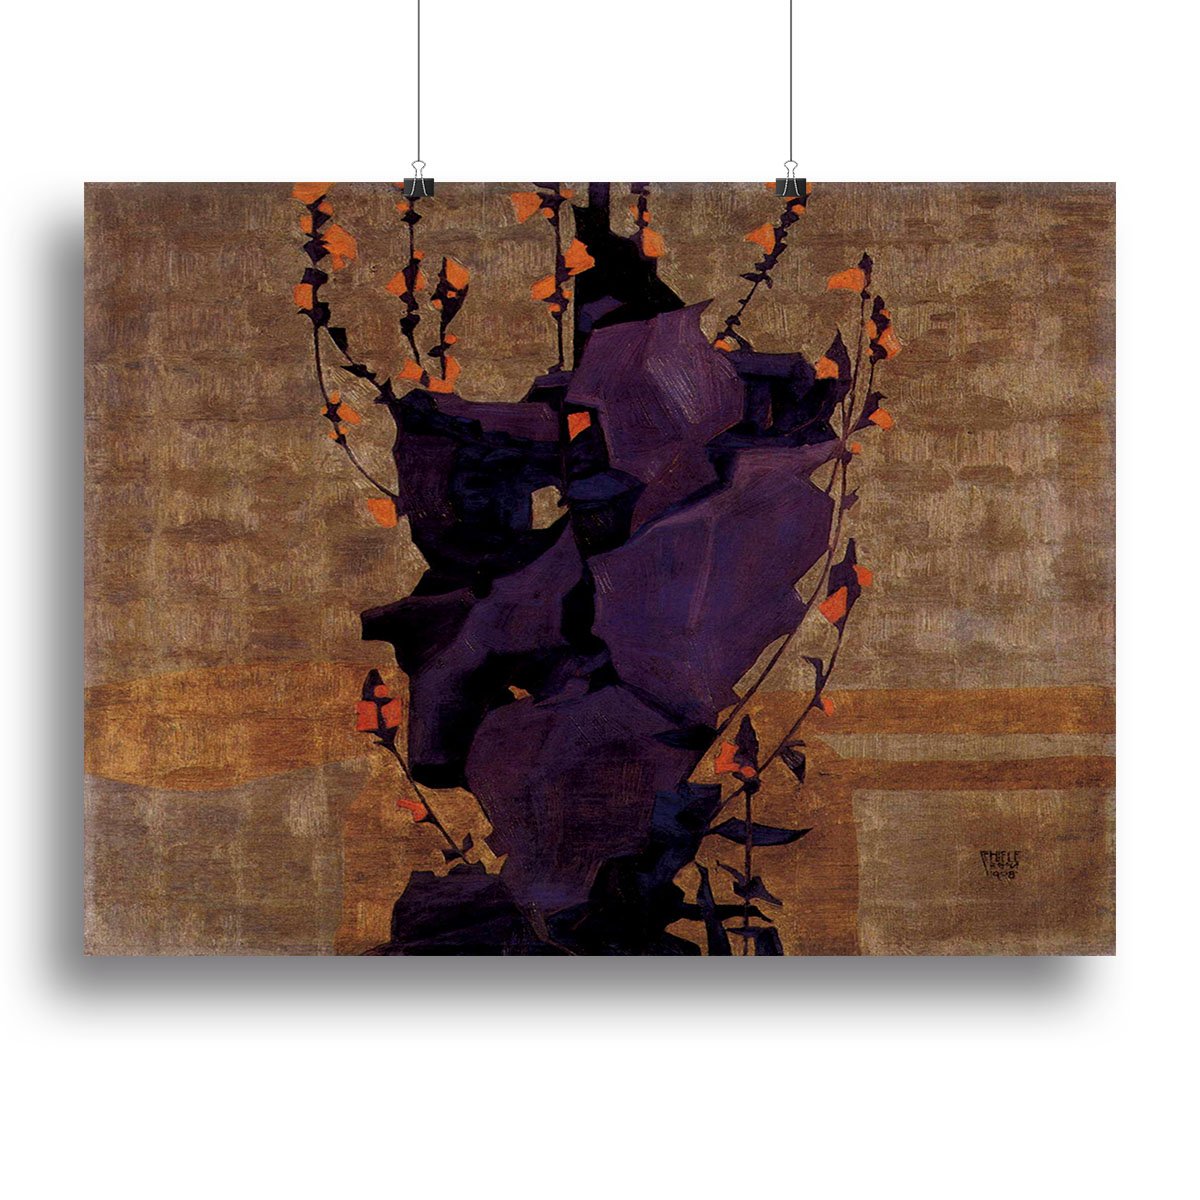 Stylized floral before decorative background style of life by Egon Schiele Canvas Print or Poster